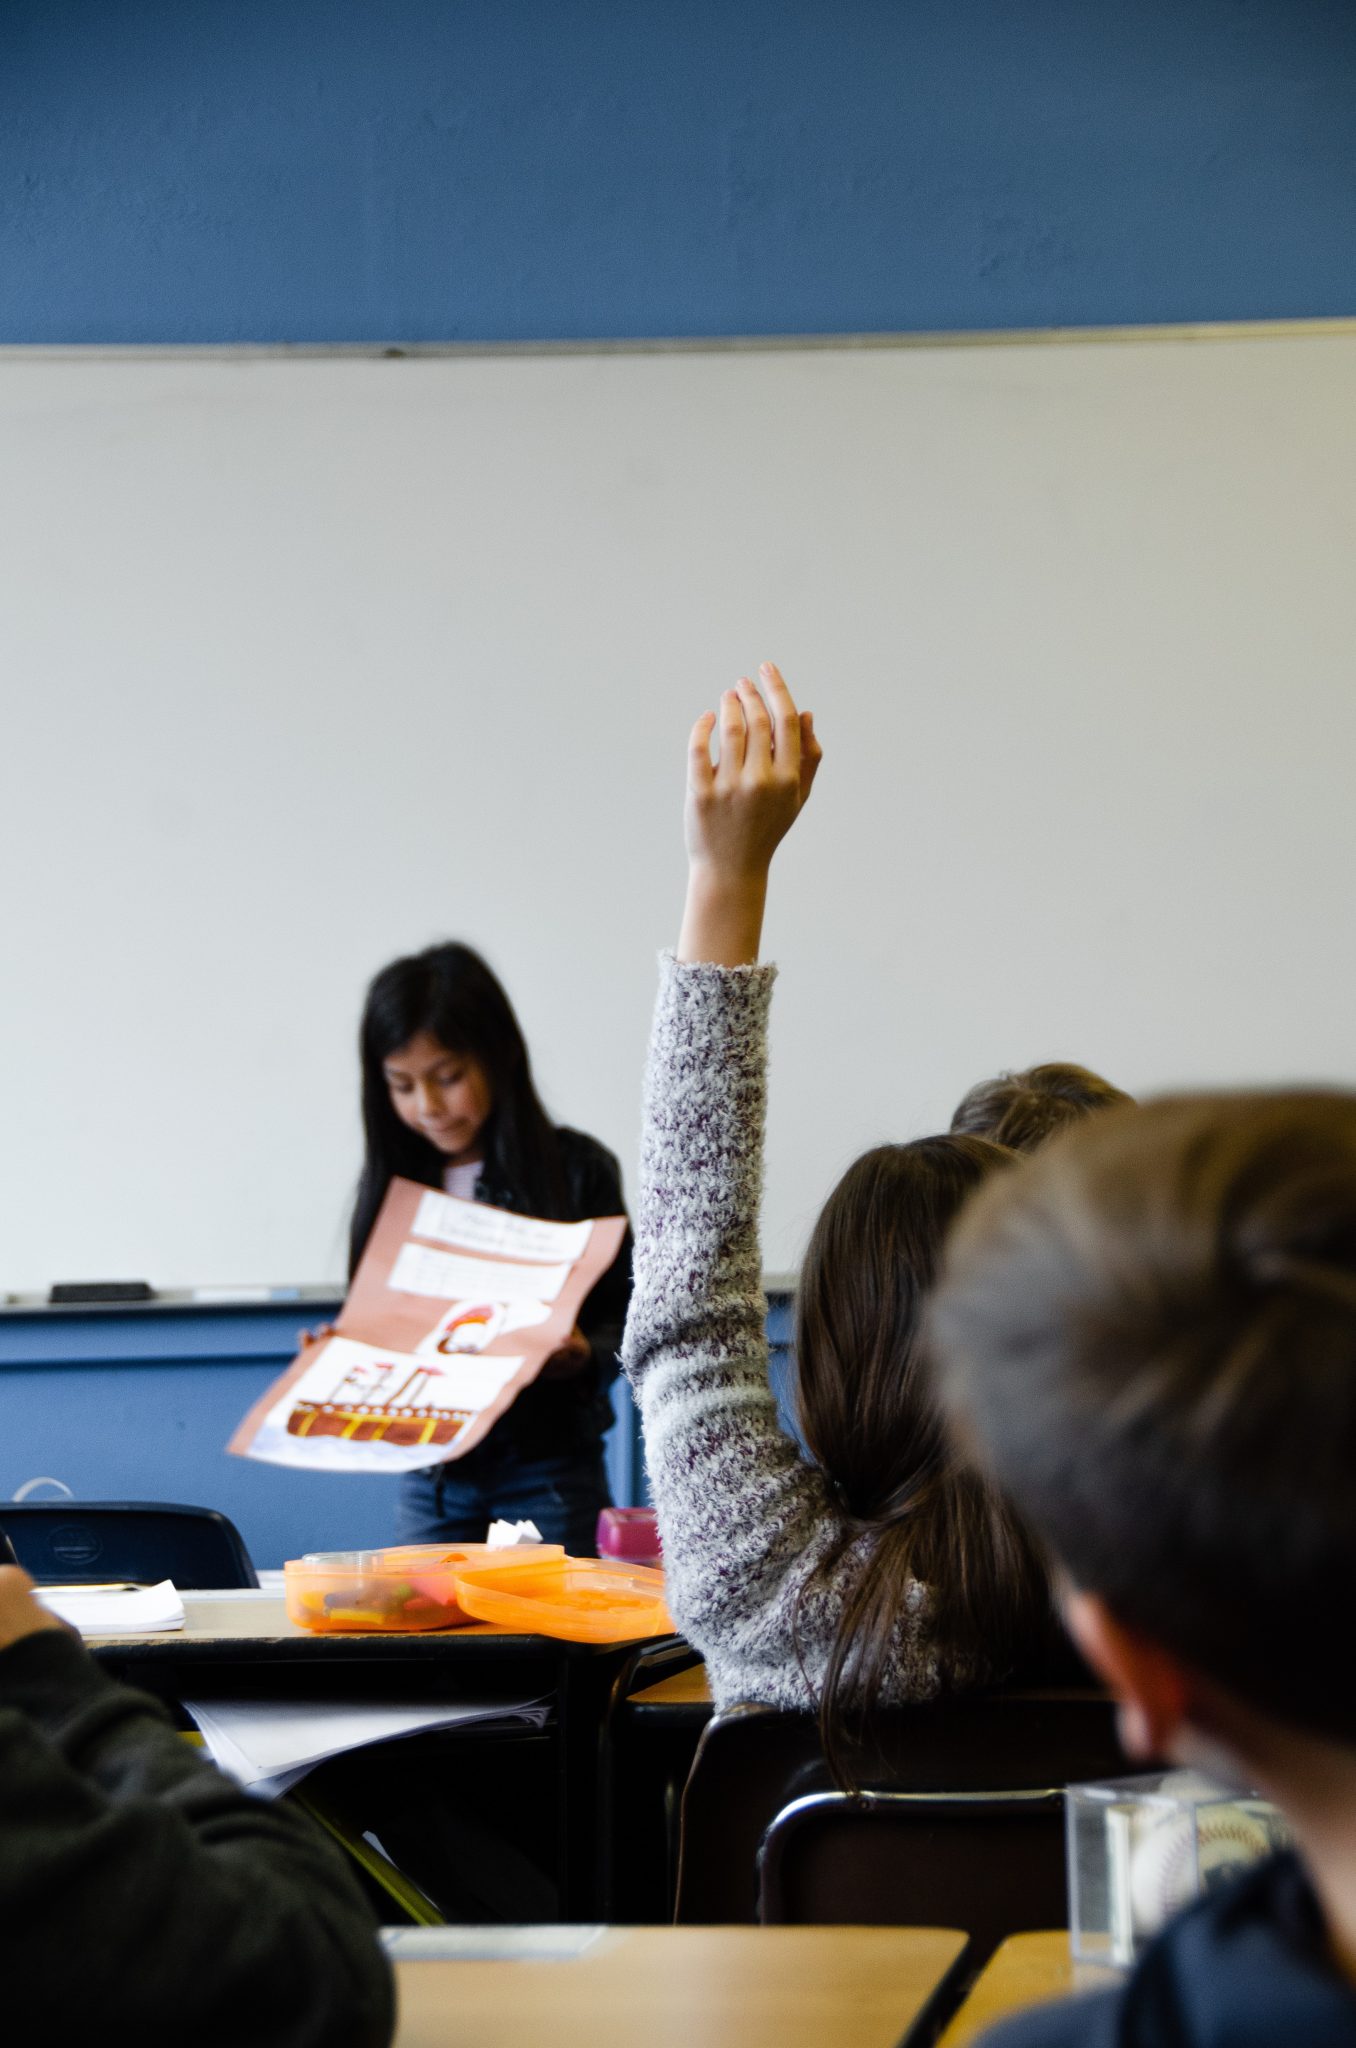 Student with her hand raised while a classmate shares a presentation